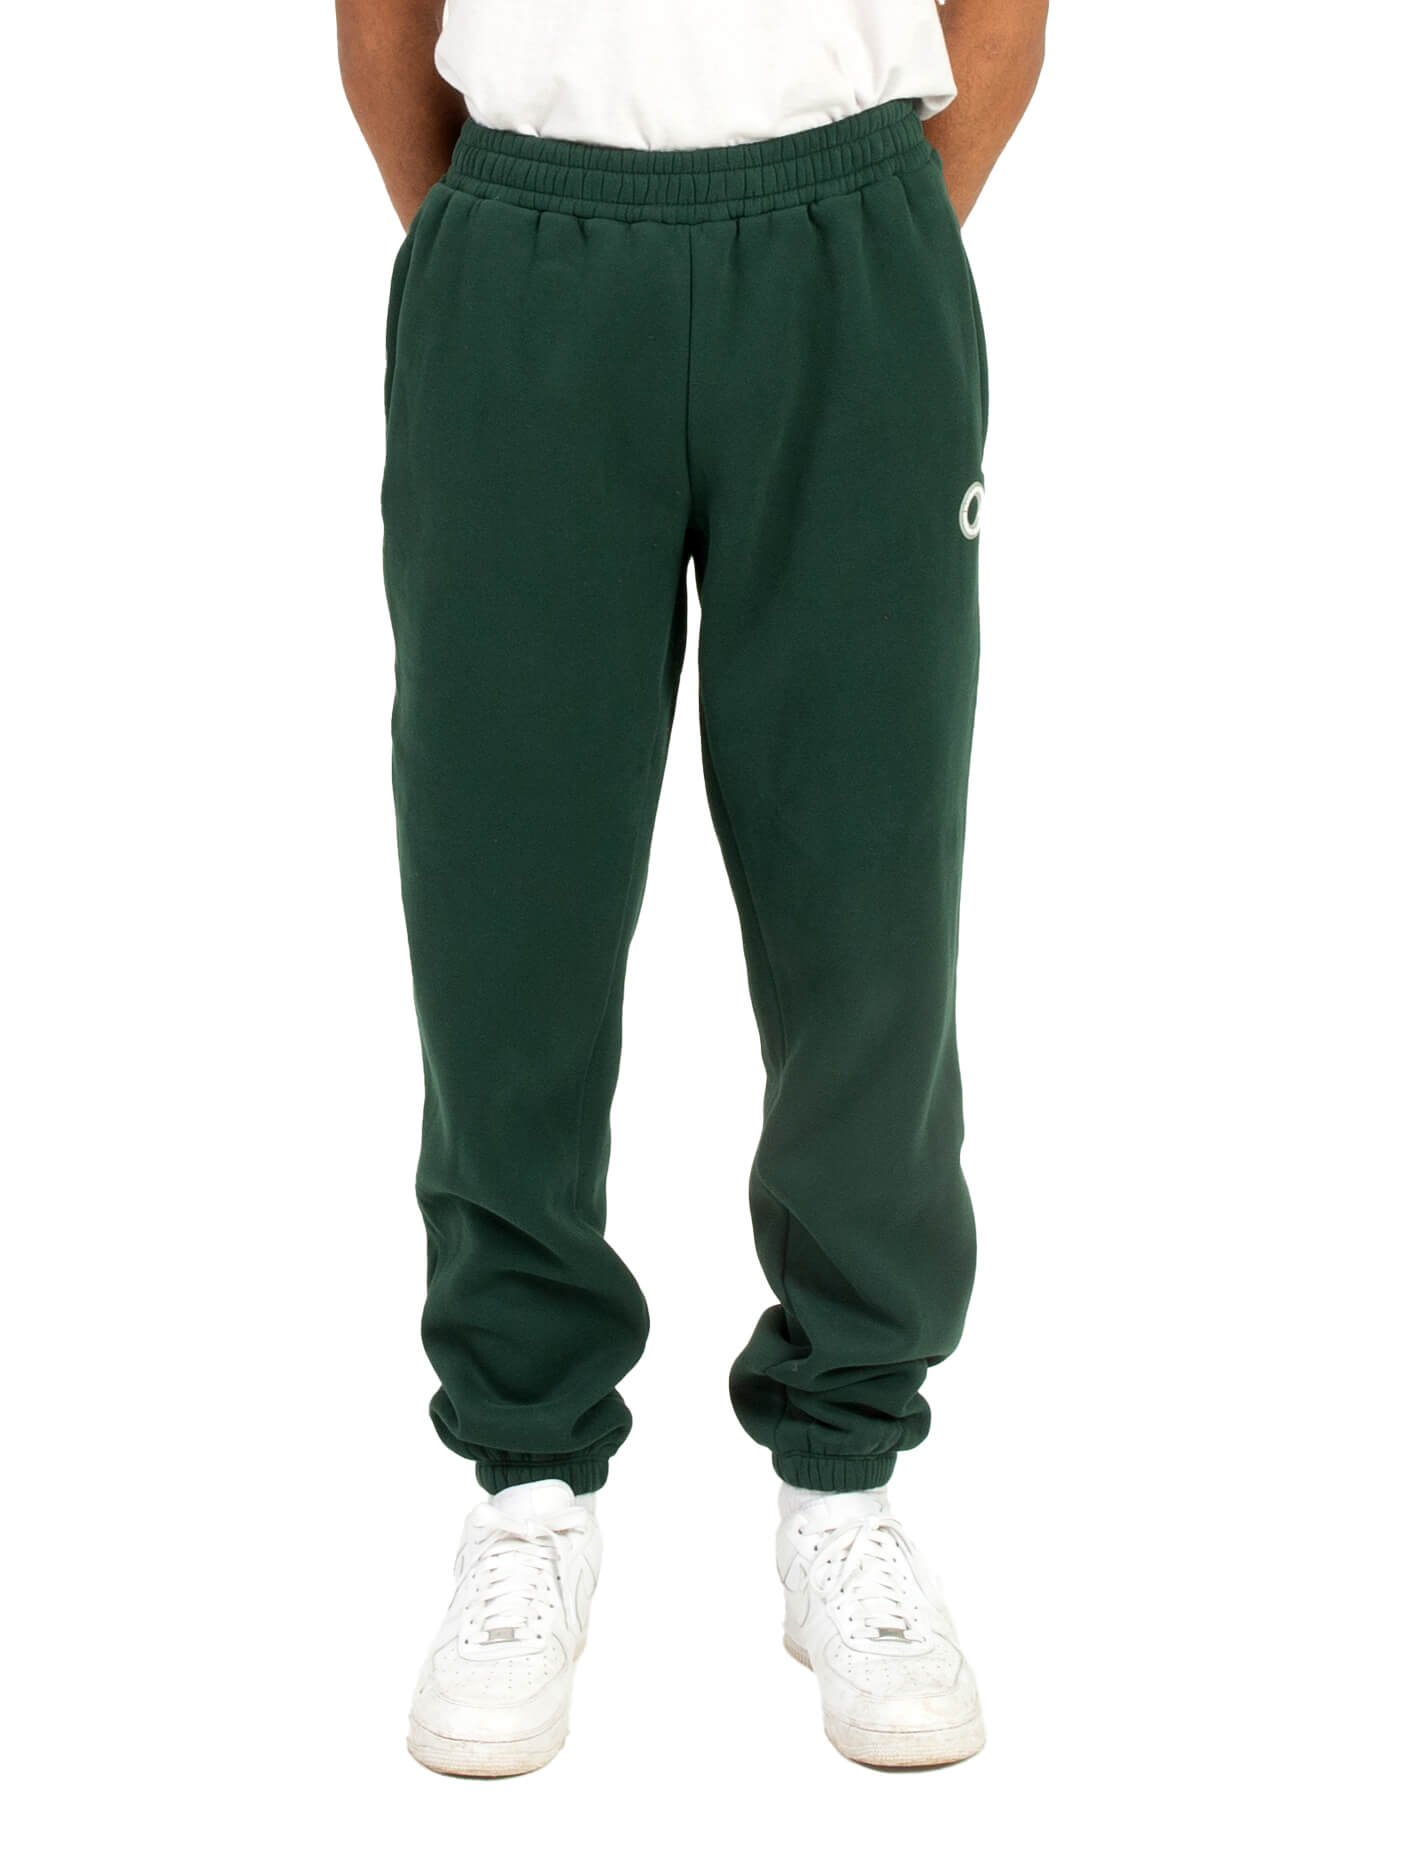 Kaylo - Forest Green Sweatpants with Rubber Patch